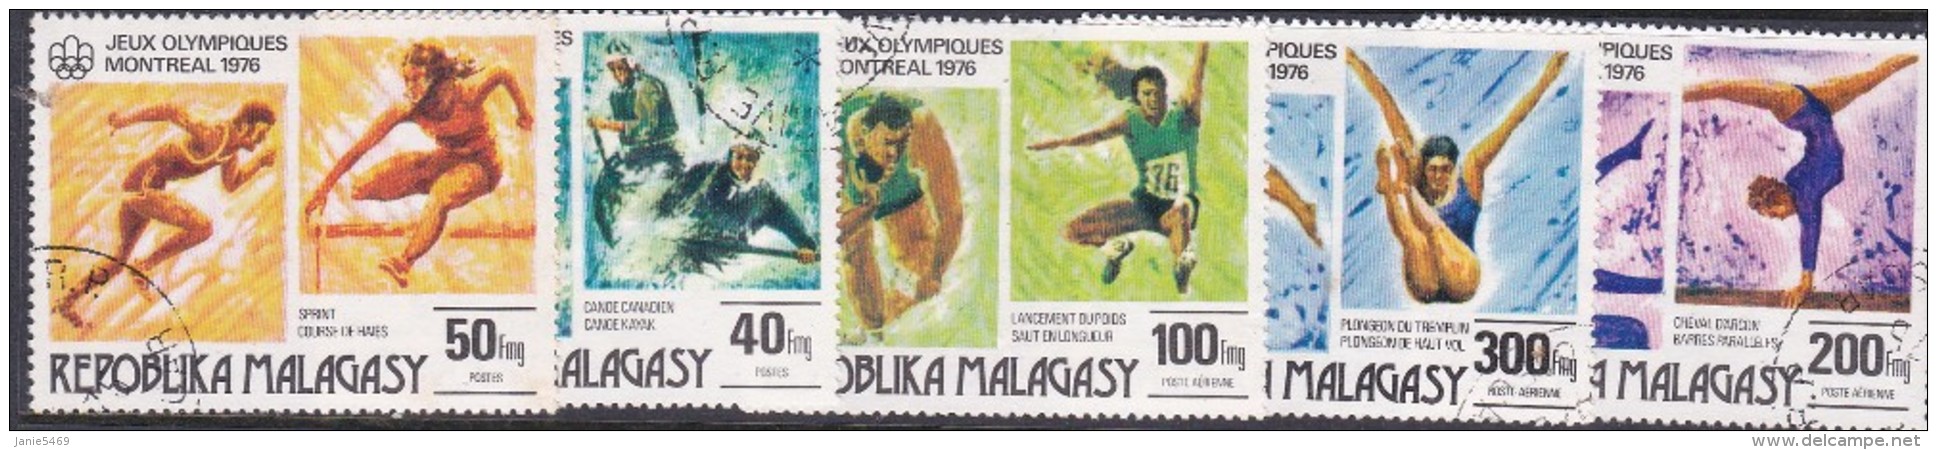 1976 Montreal Malagasy Olympic Games Used - Summer 1976: Montreal